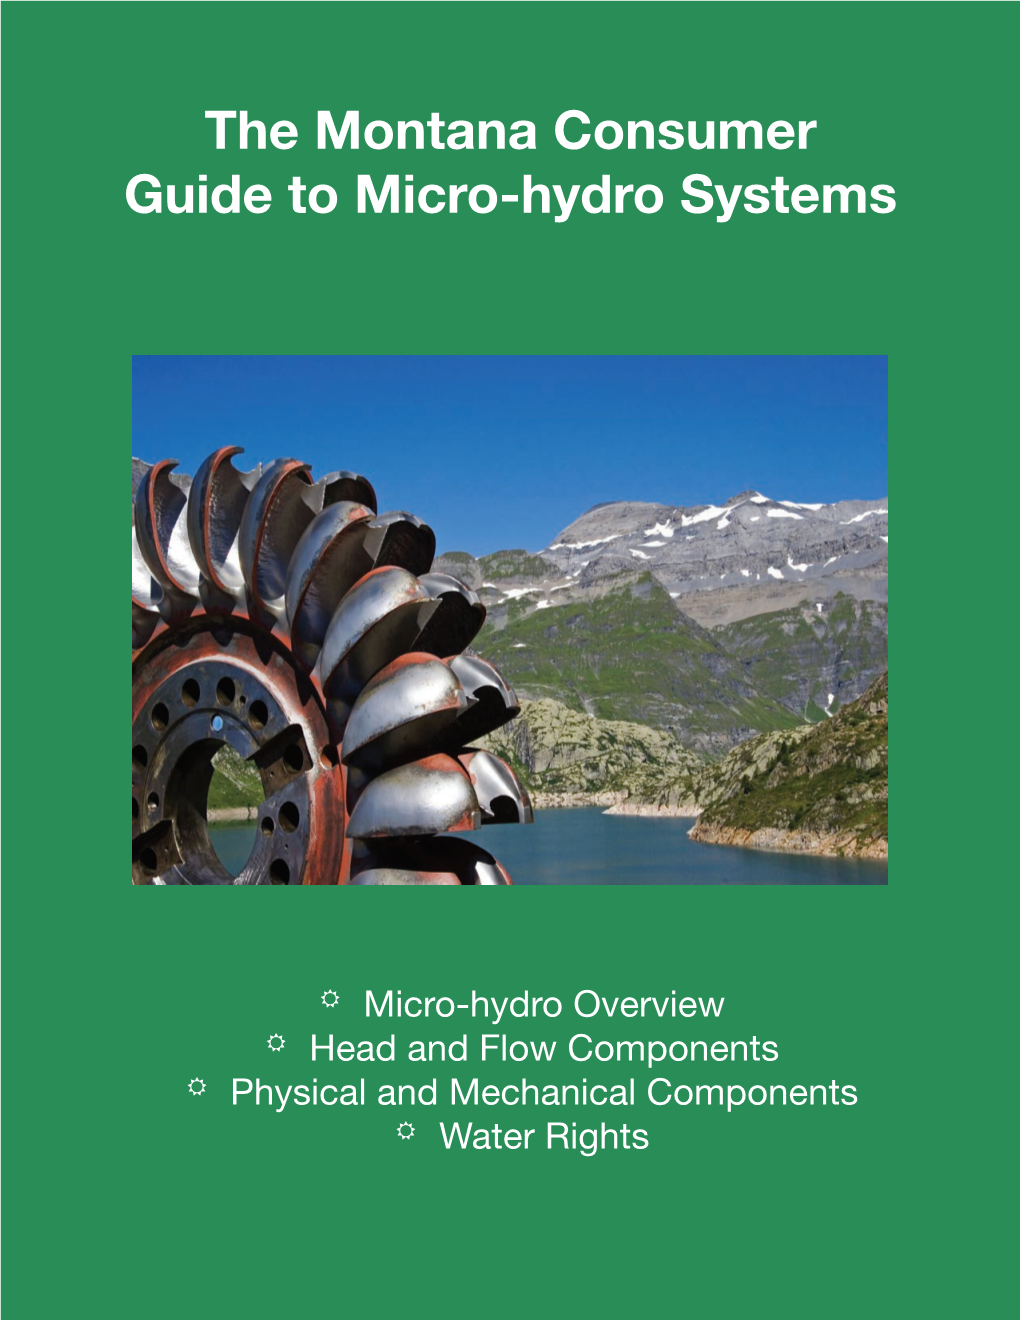 The Montana Consumer Guide to Micro-Hydro Systems